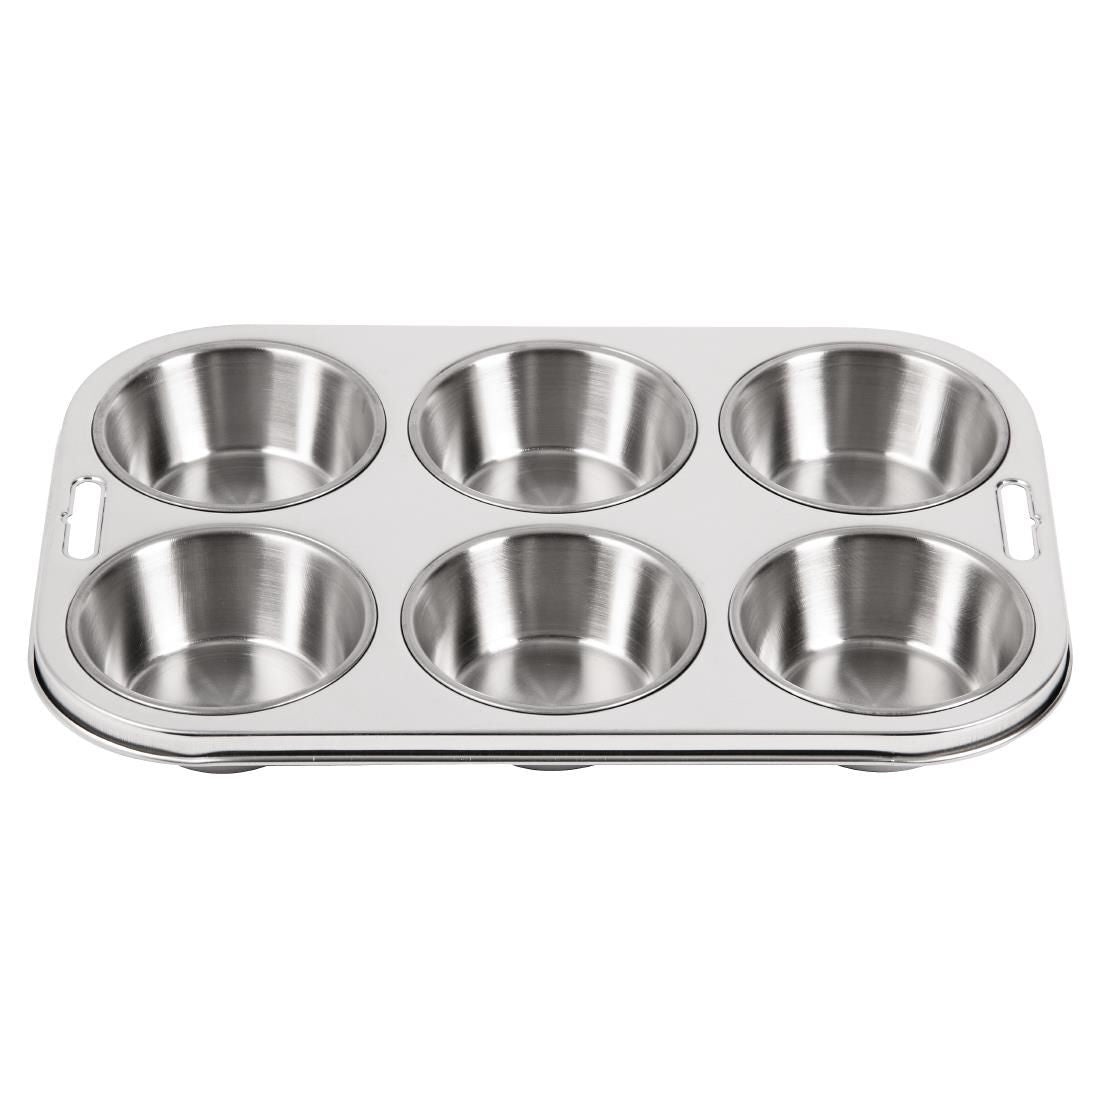 E714 Vogue Stainless Steel Deep Muffin Tray 6 Cup JD Catering Equipment Solutions Ltd